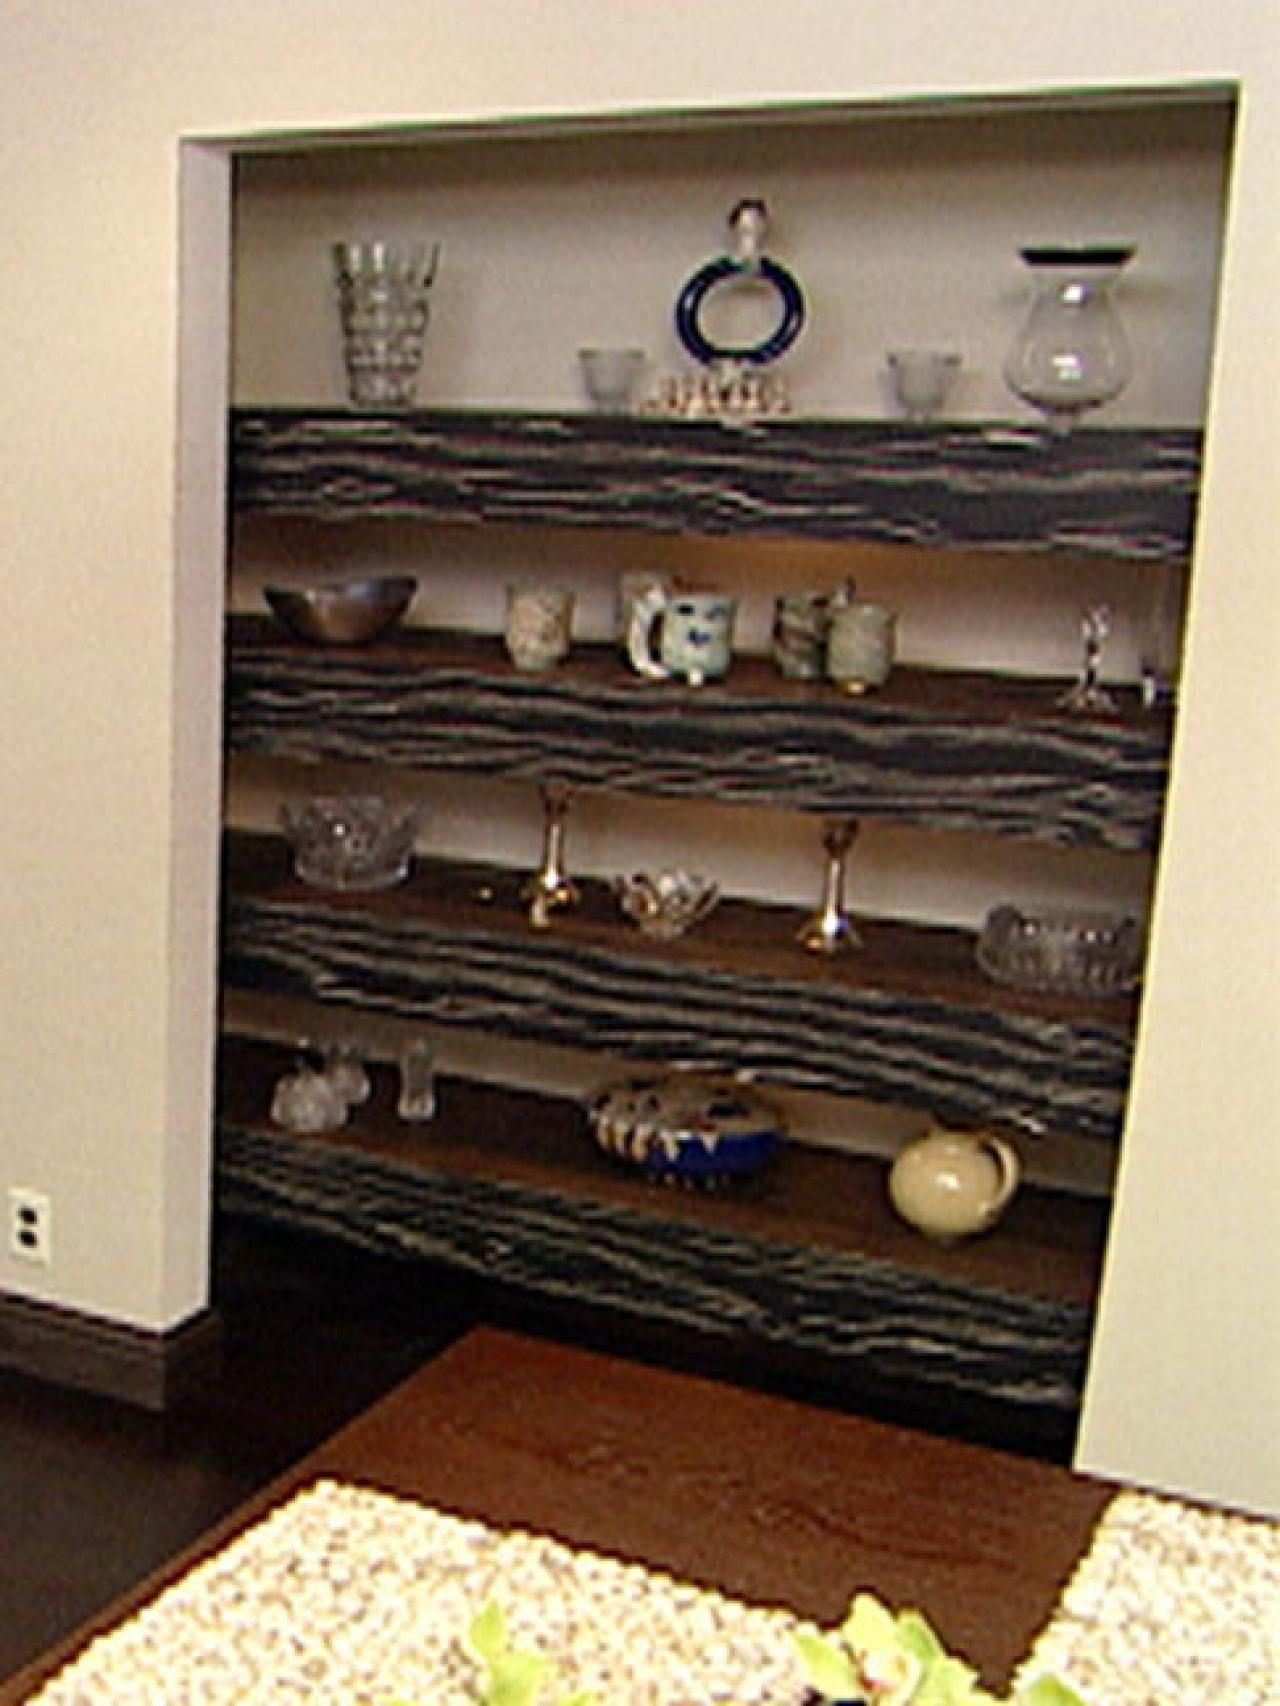 Shelves Decor: Homely Accent With A Personal Touch